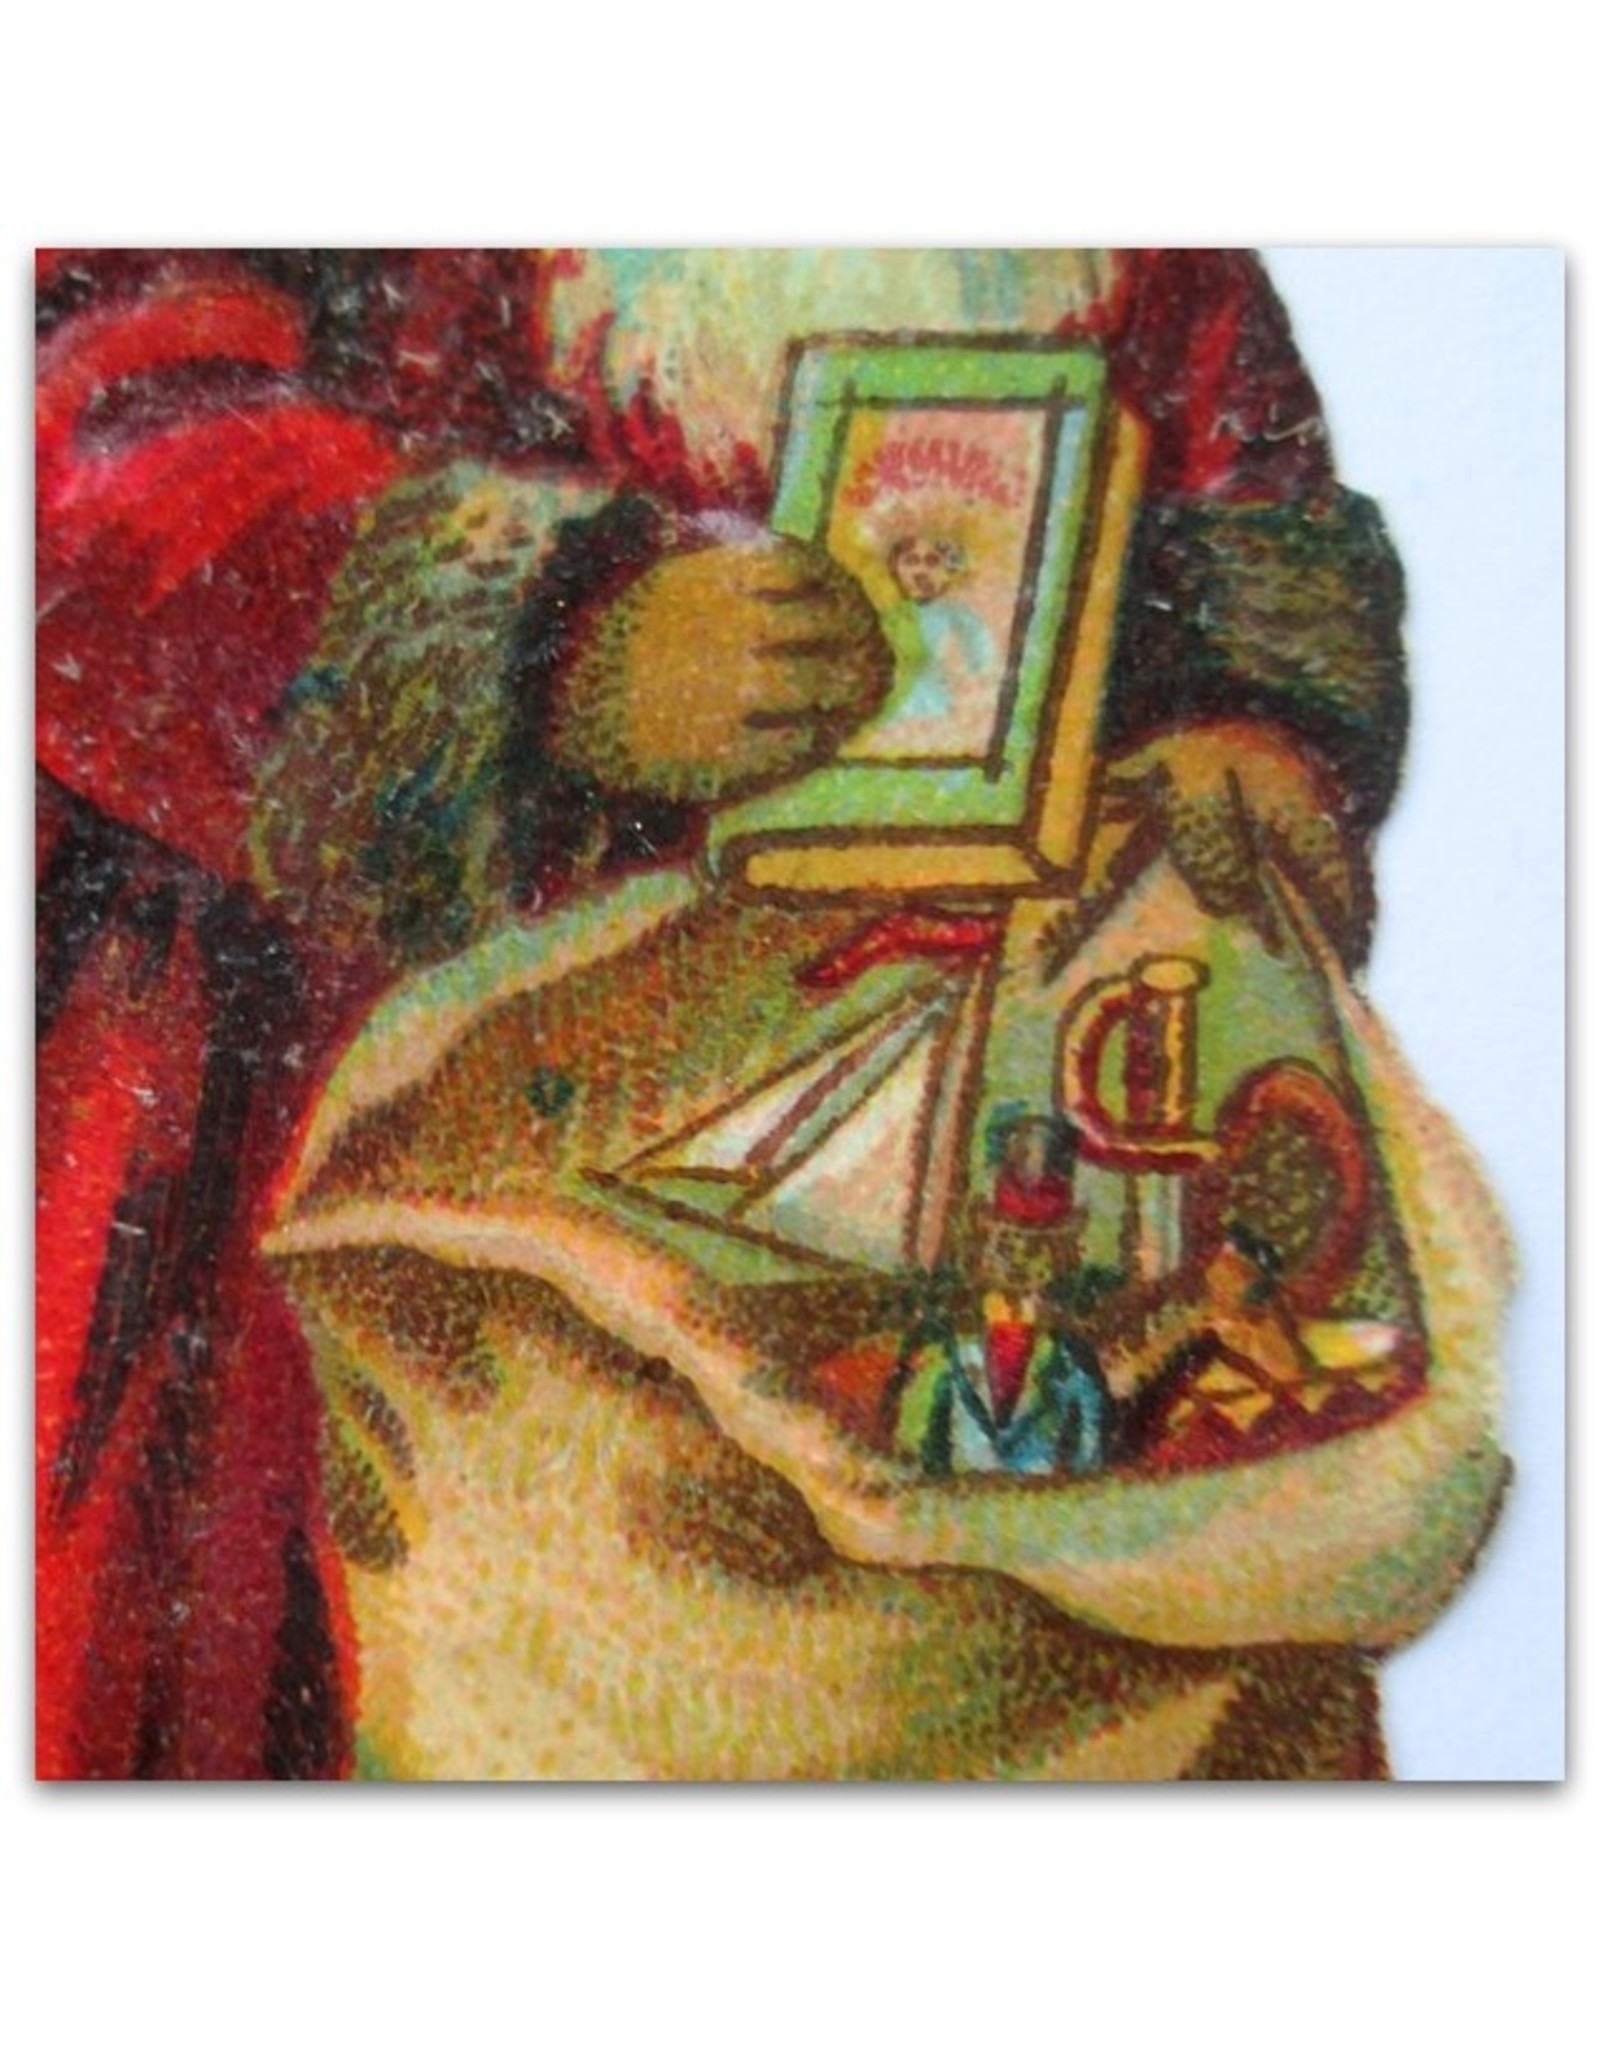 [Christmas]: [Album pictures featuring two Santa Claus figures in chromolithography]